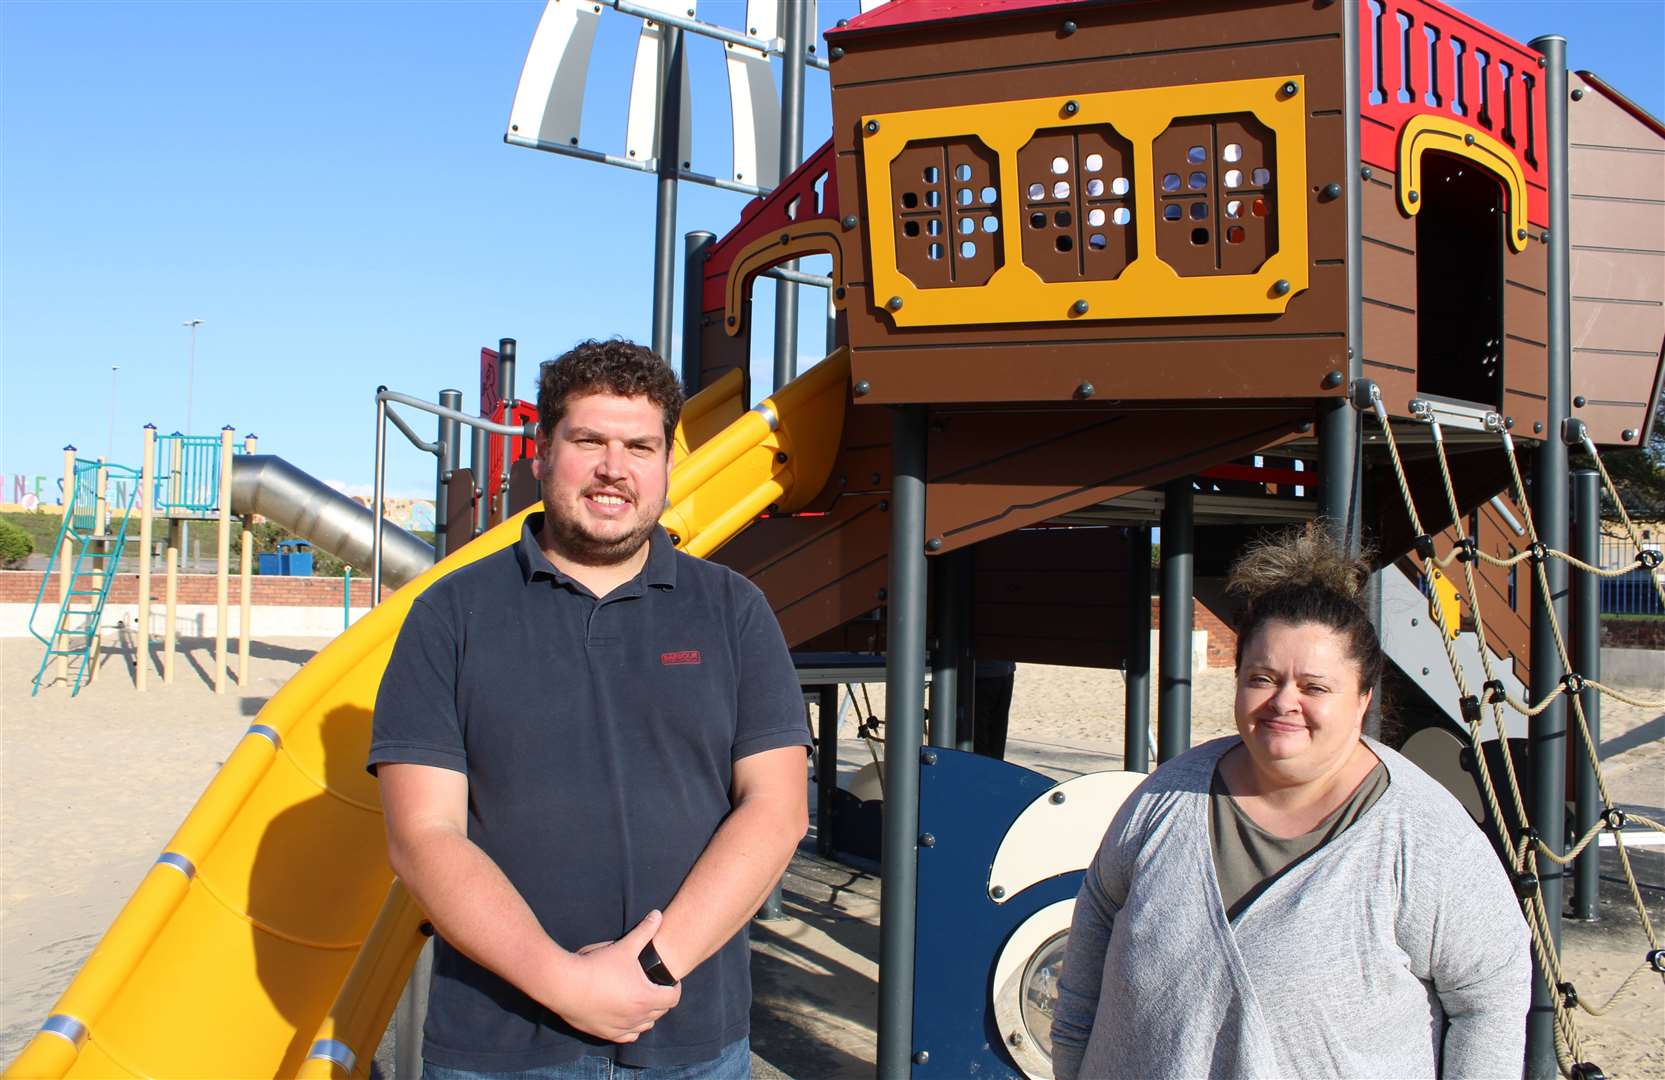 From left: Cllr Elliott Jayes and Cllr Dolley Wooster at the new pirate ship play area at Beachfields, Sheerness